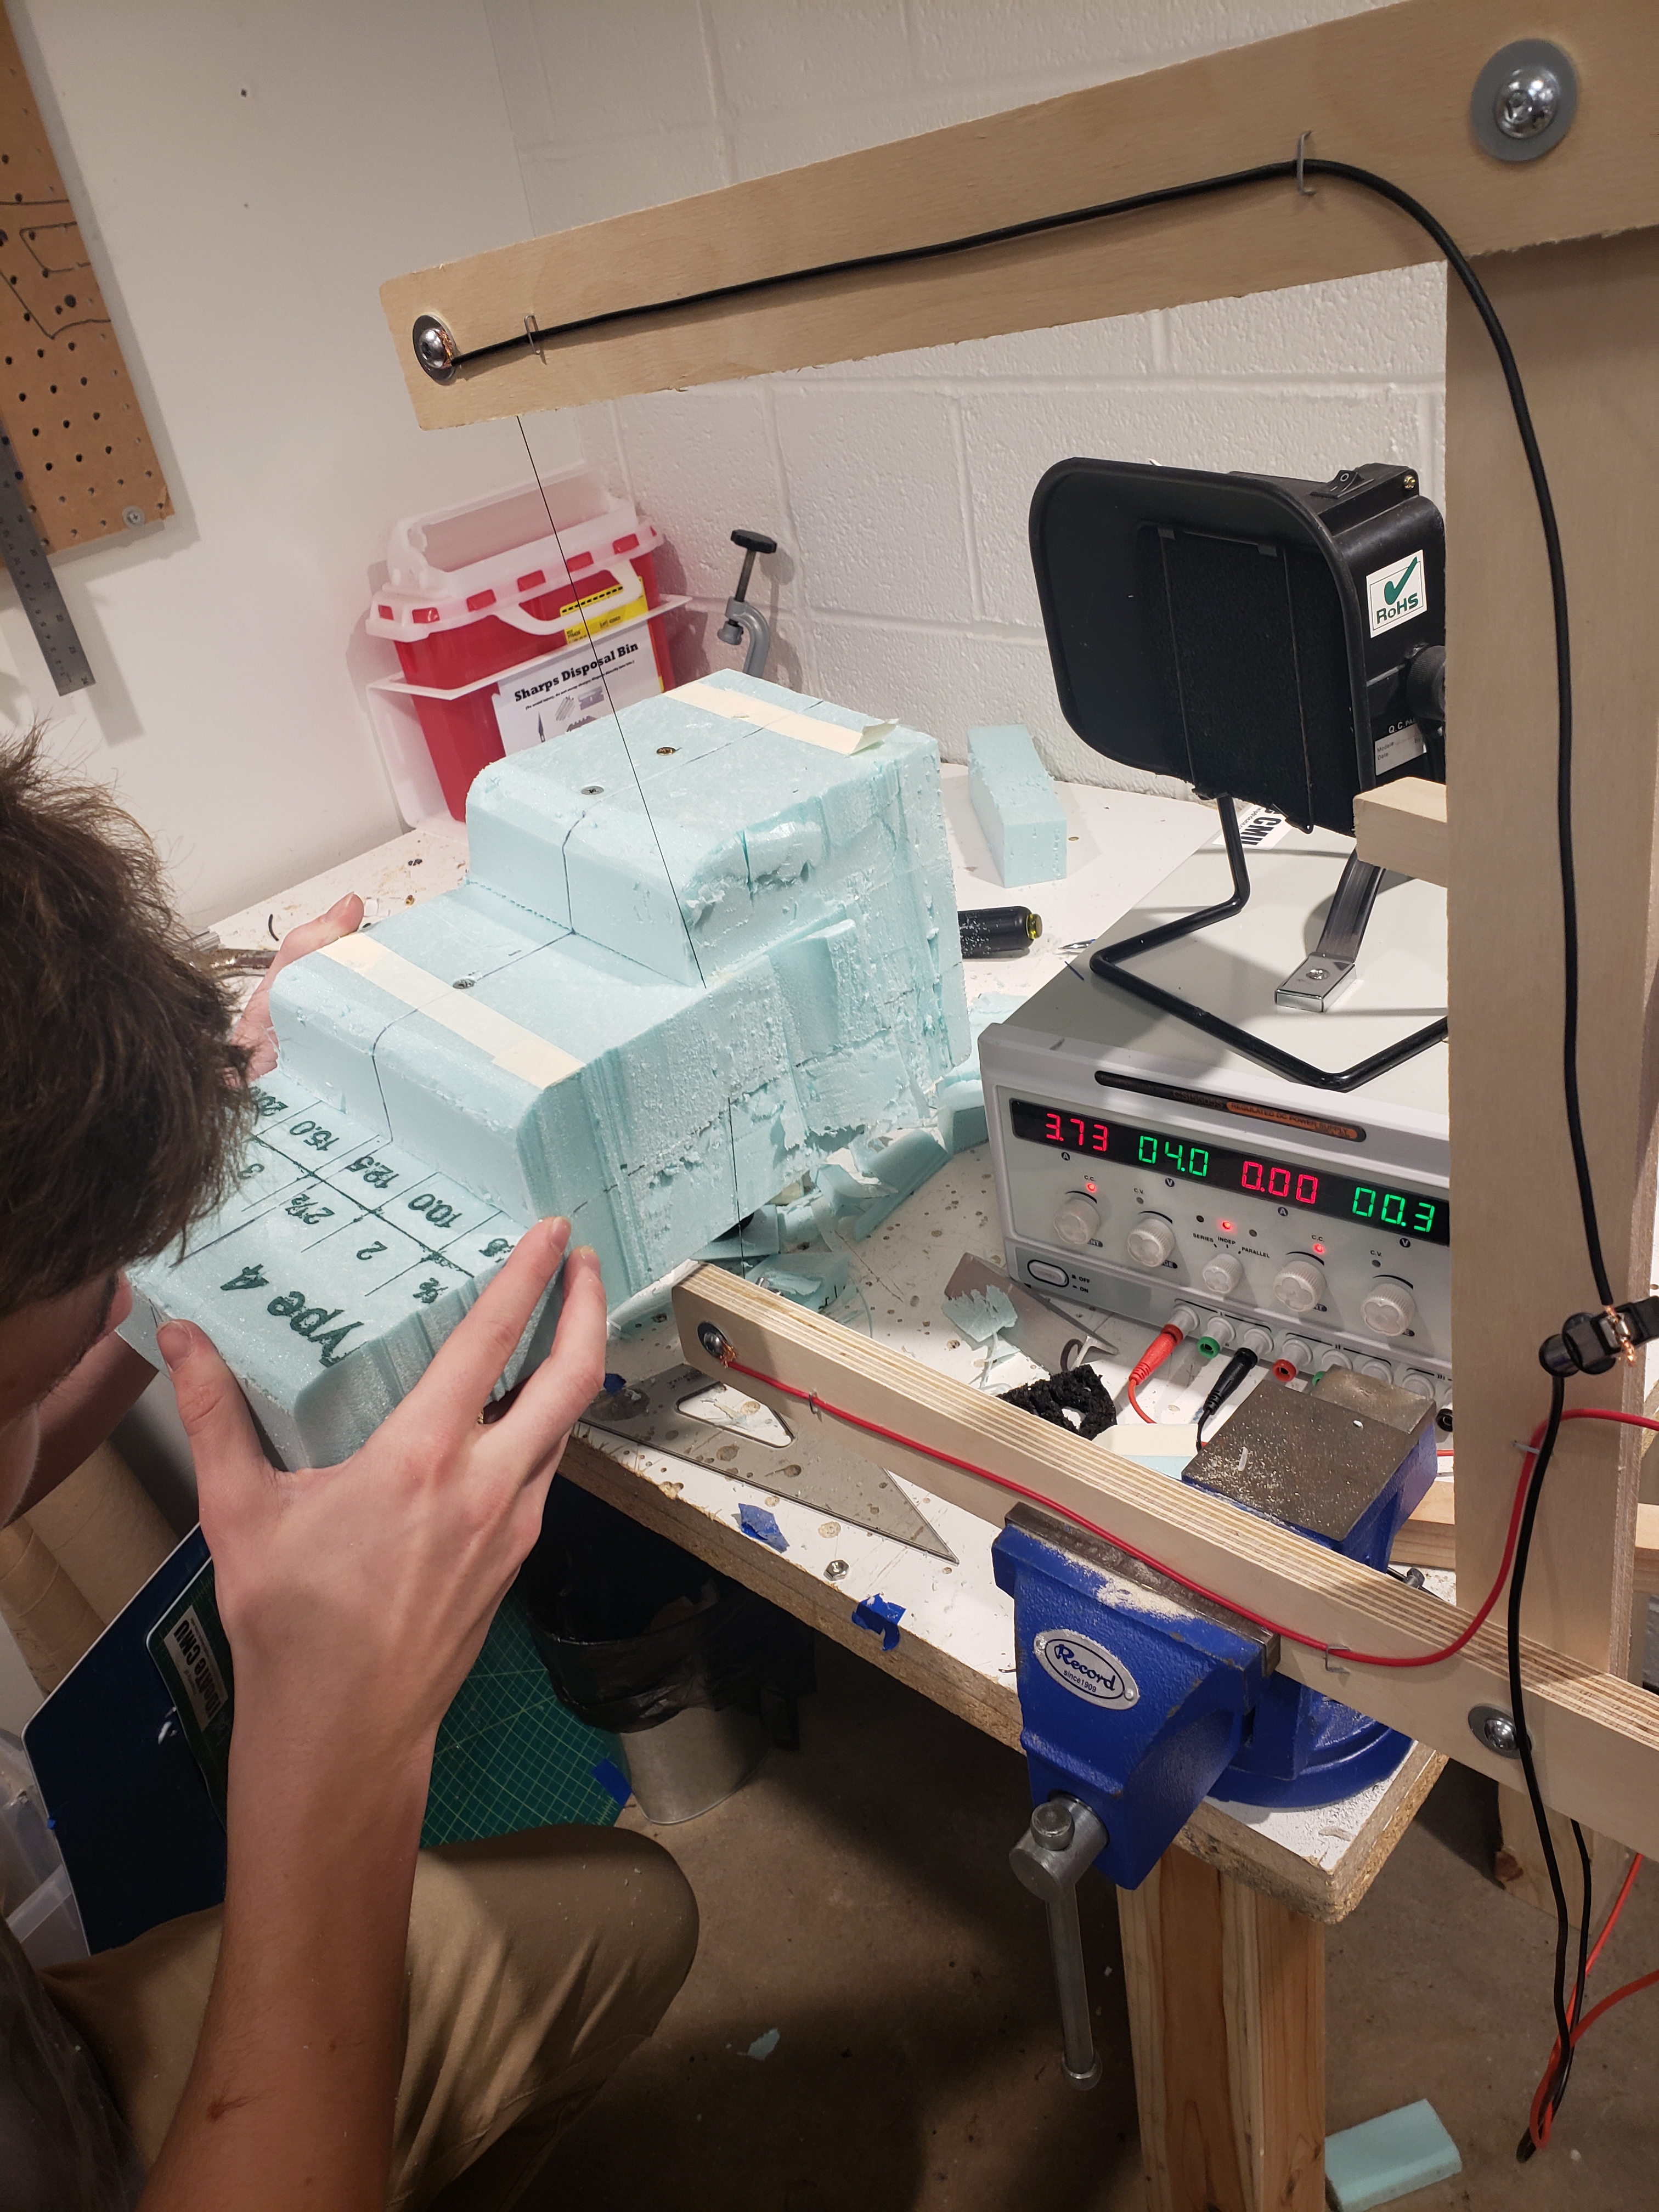 Nick was cutting the foam for vacuum forming the second iteration of the main fountain part.